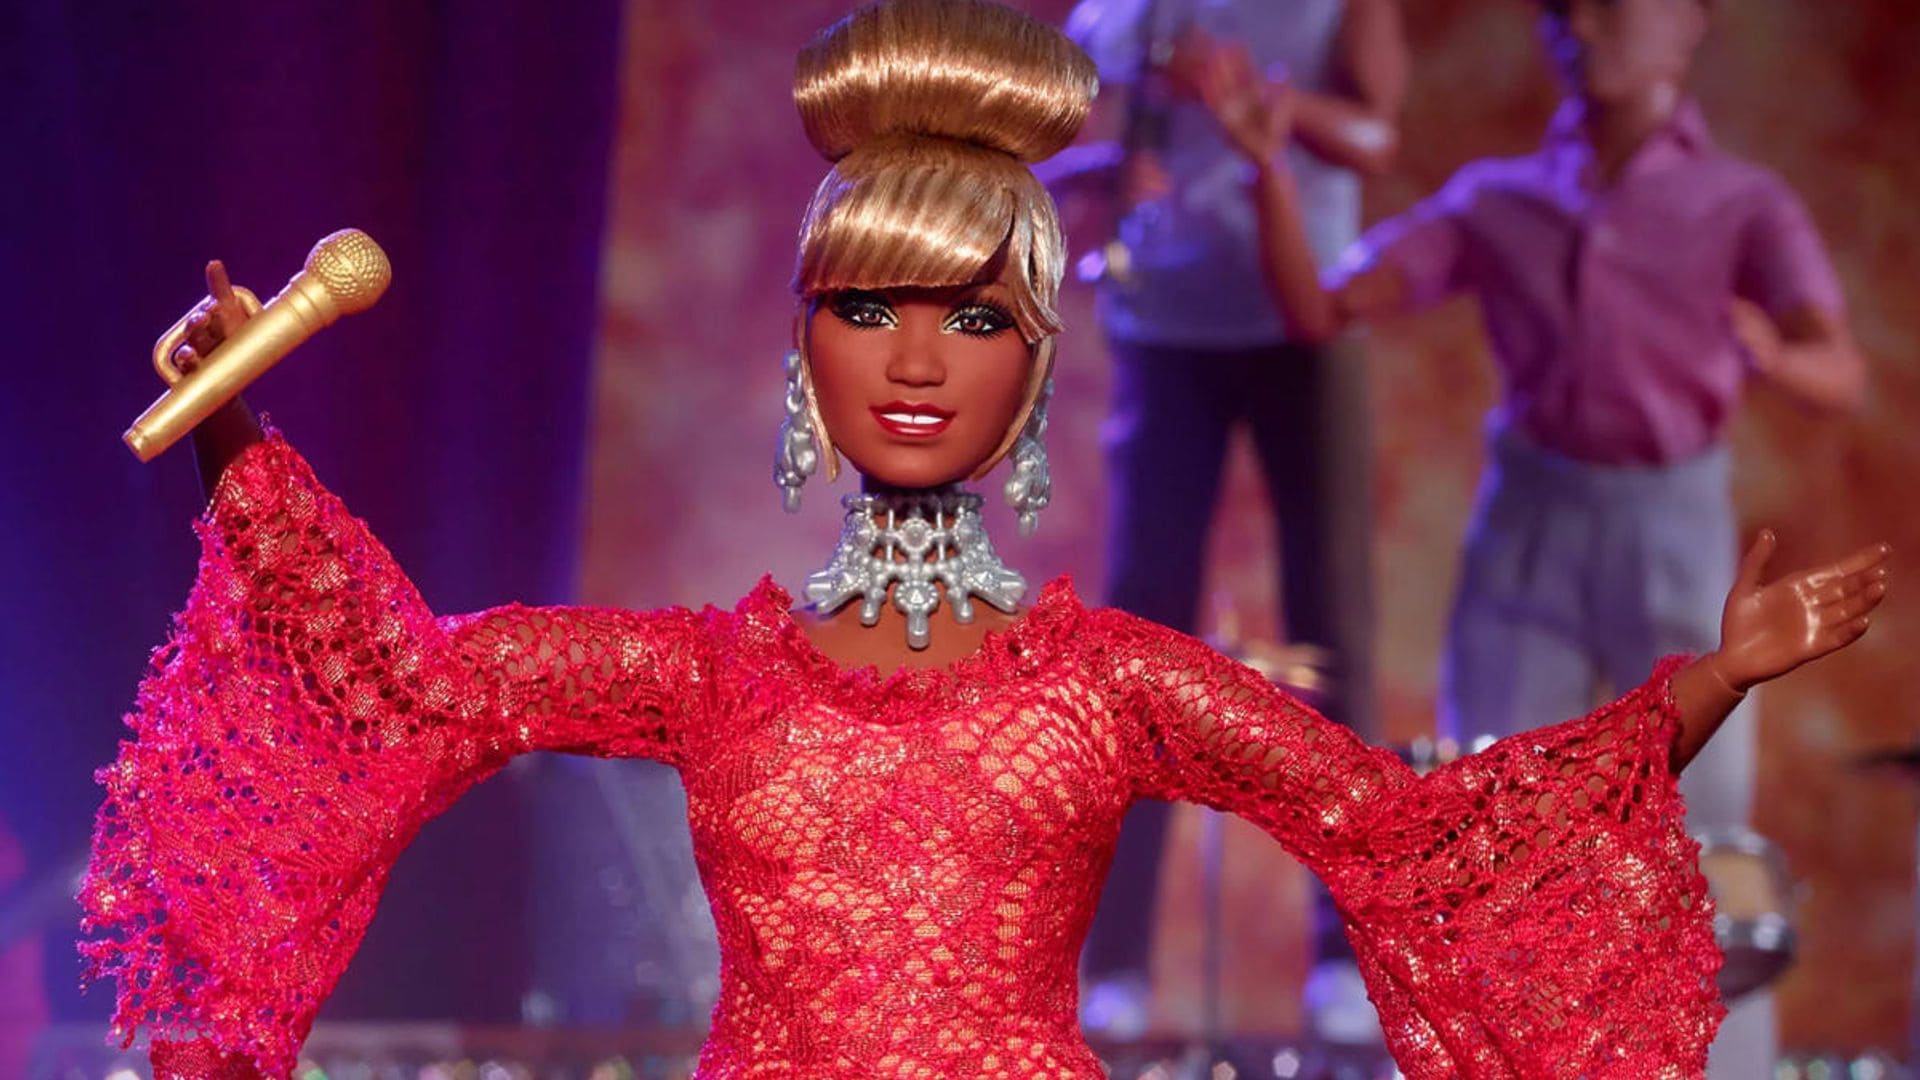 Celia Cruz doll is available to purchase: The ‘Queen of Salsa’ immortalized in Barbie’s Inspiring Women Series